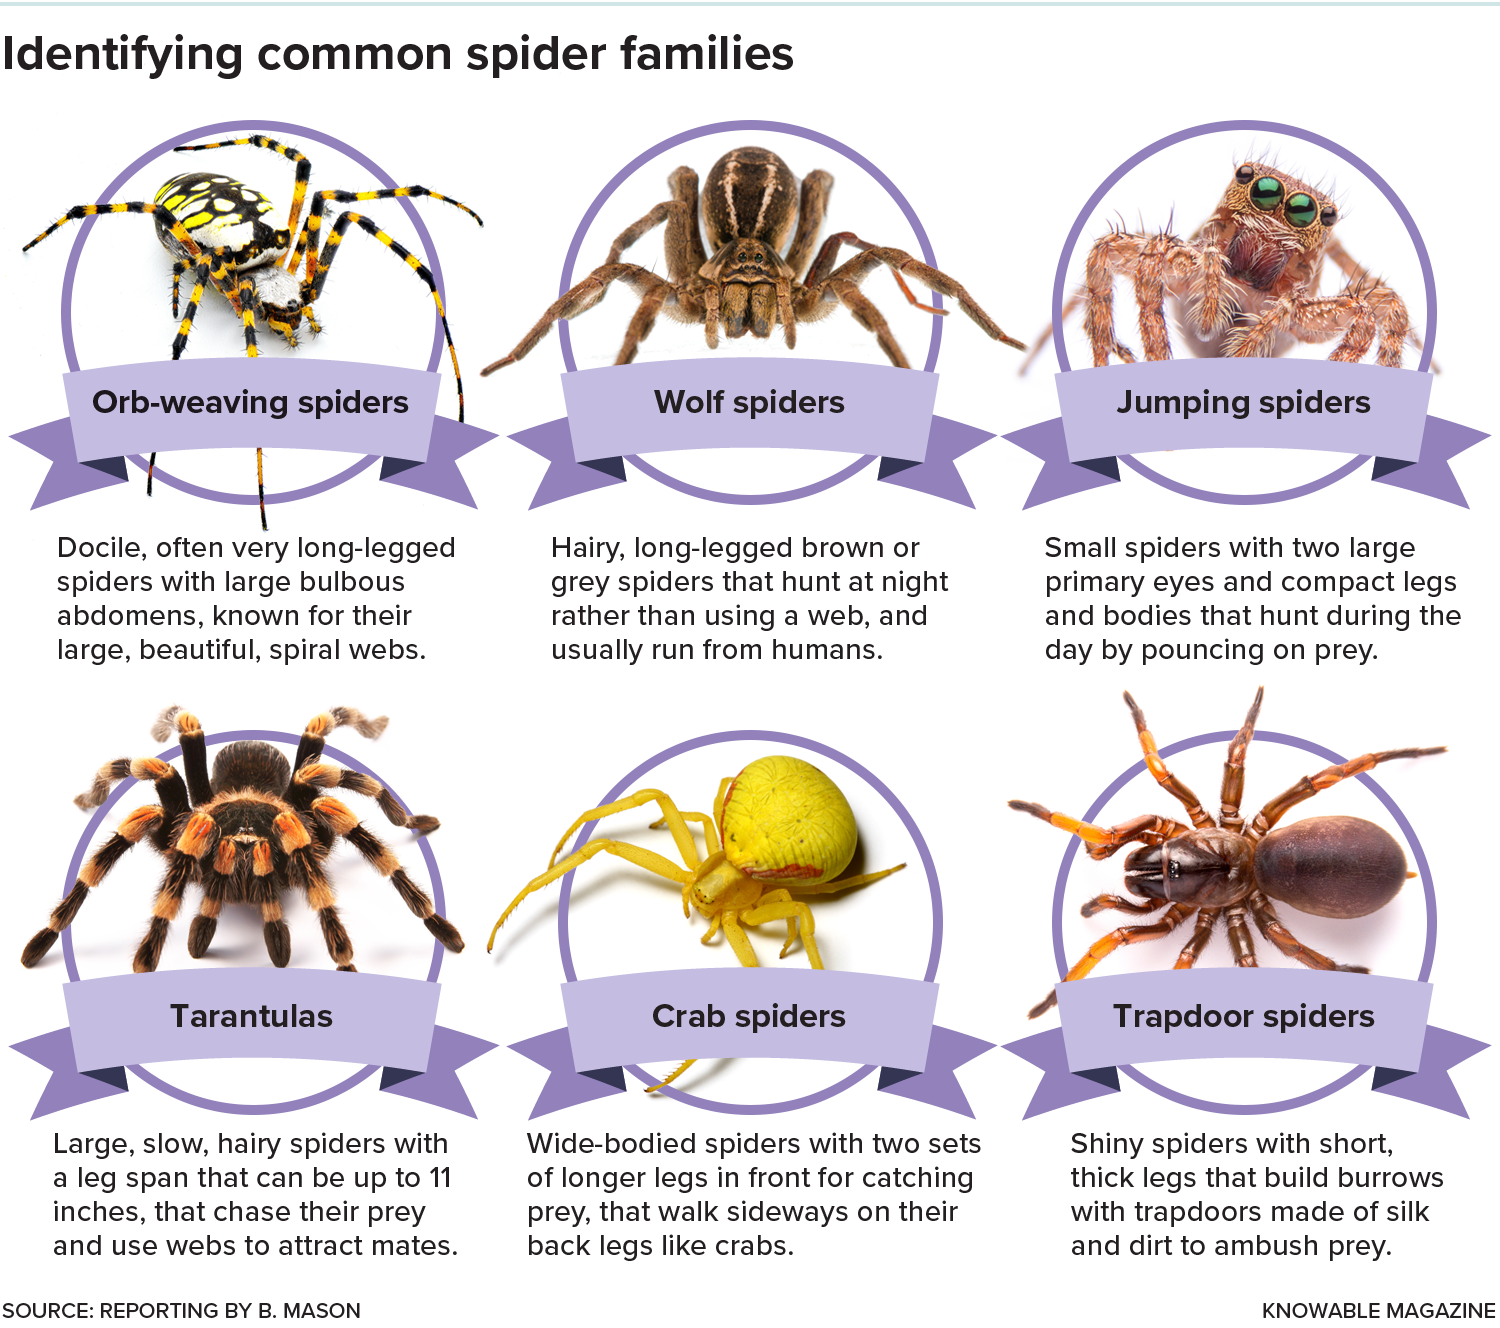 Short summaries of six spider families, each with a representative photo